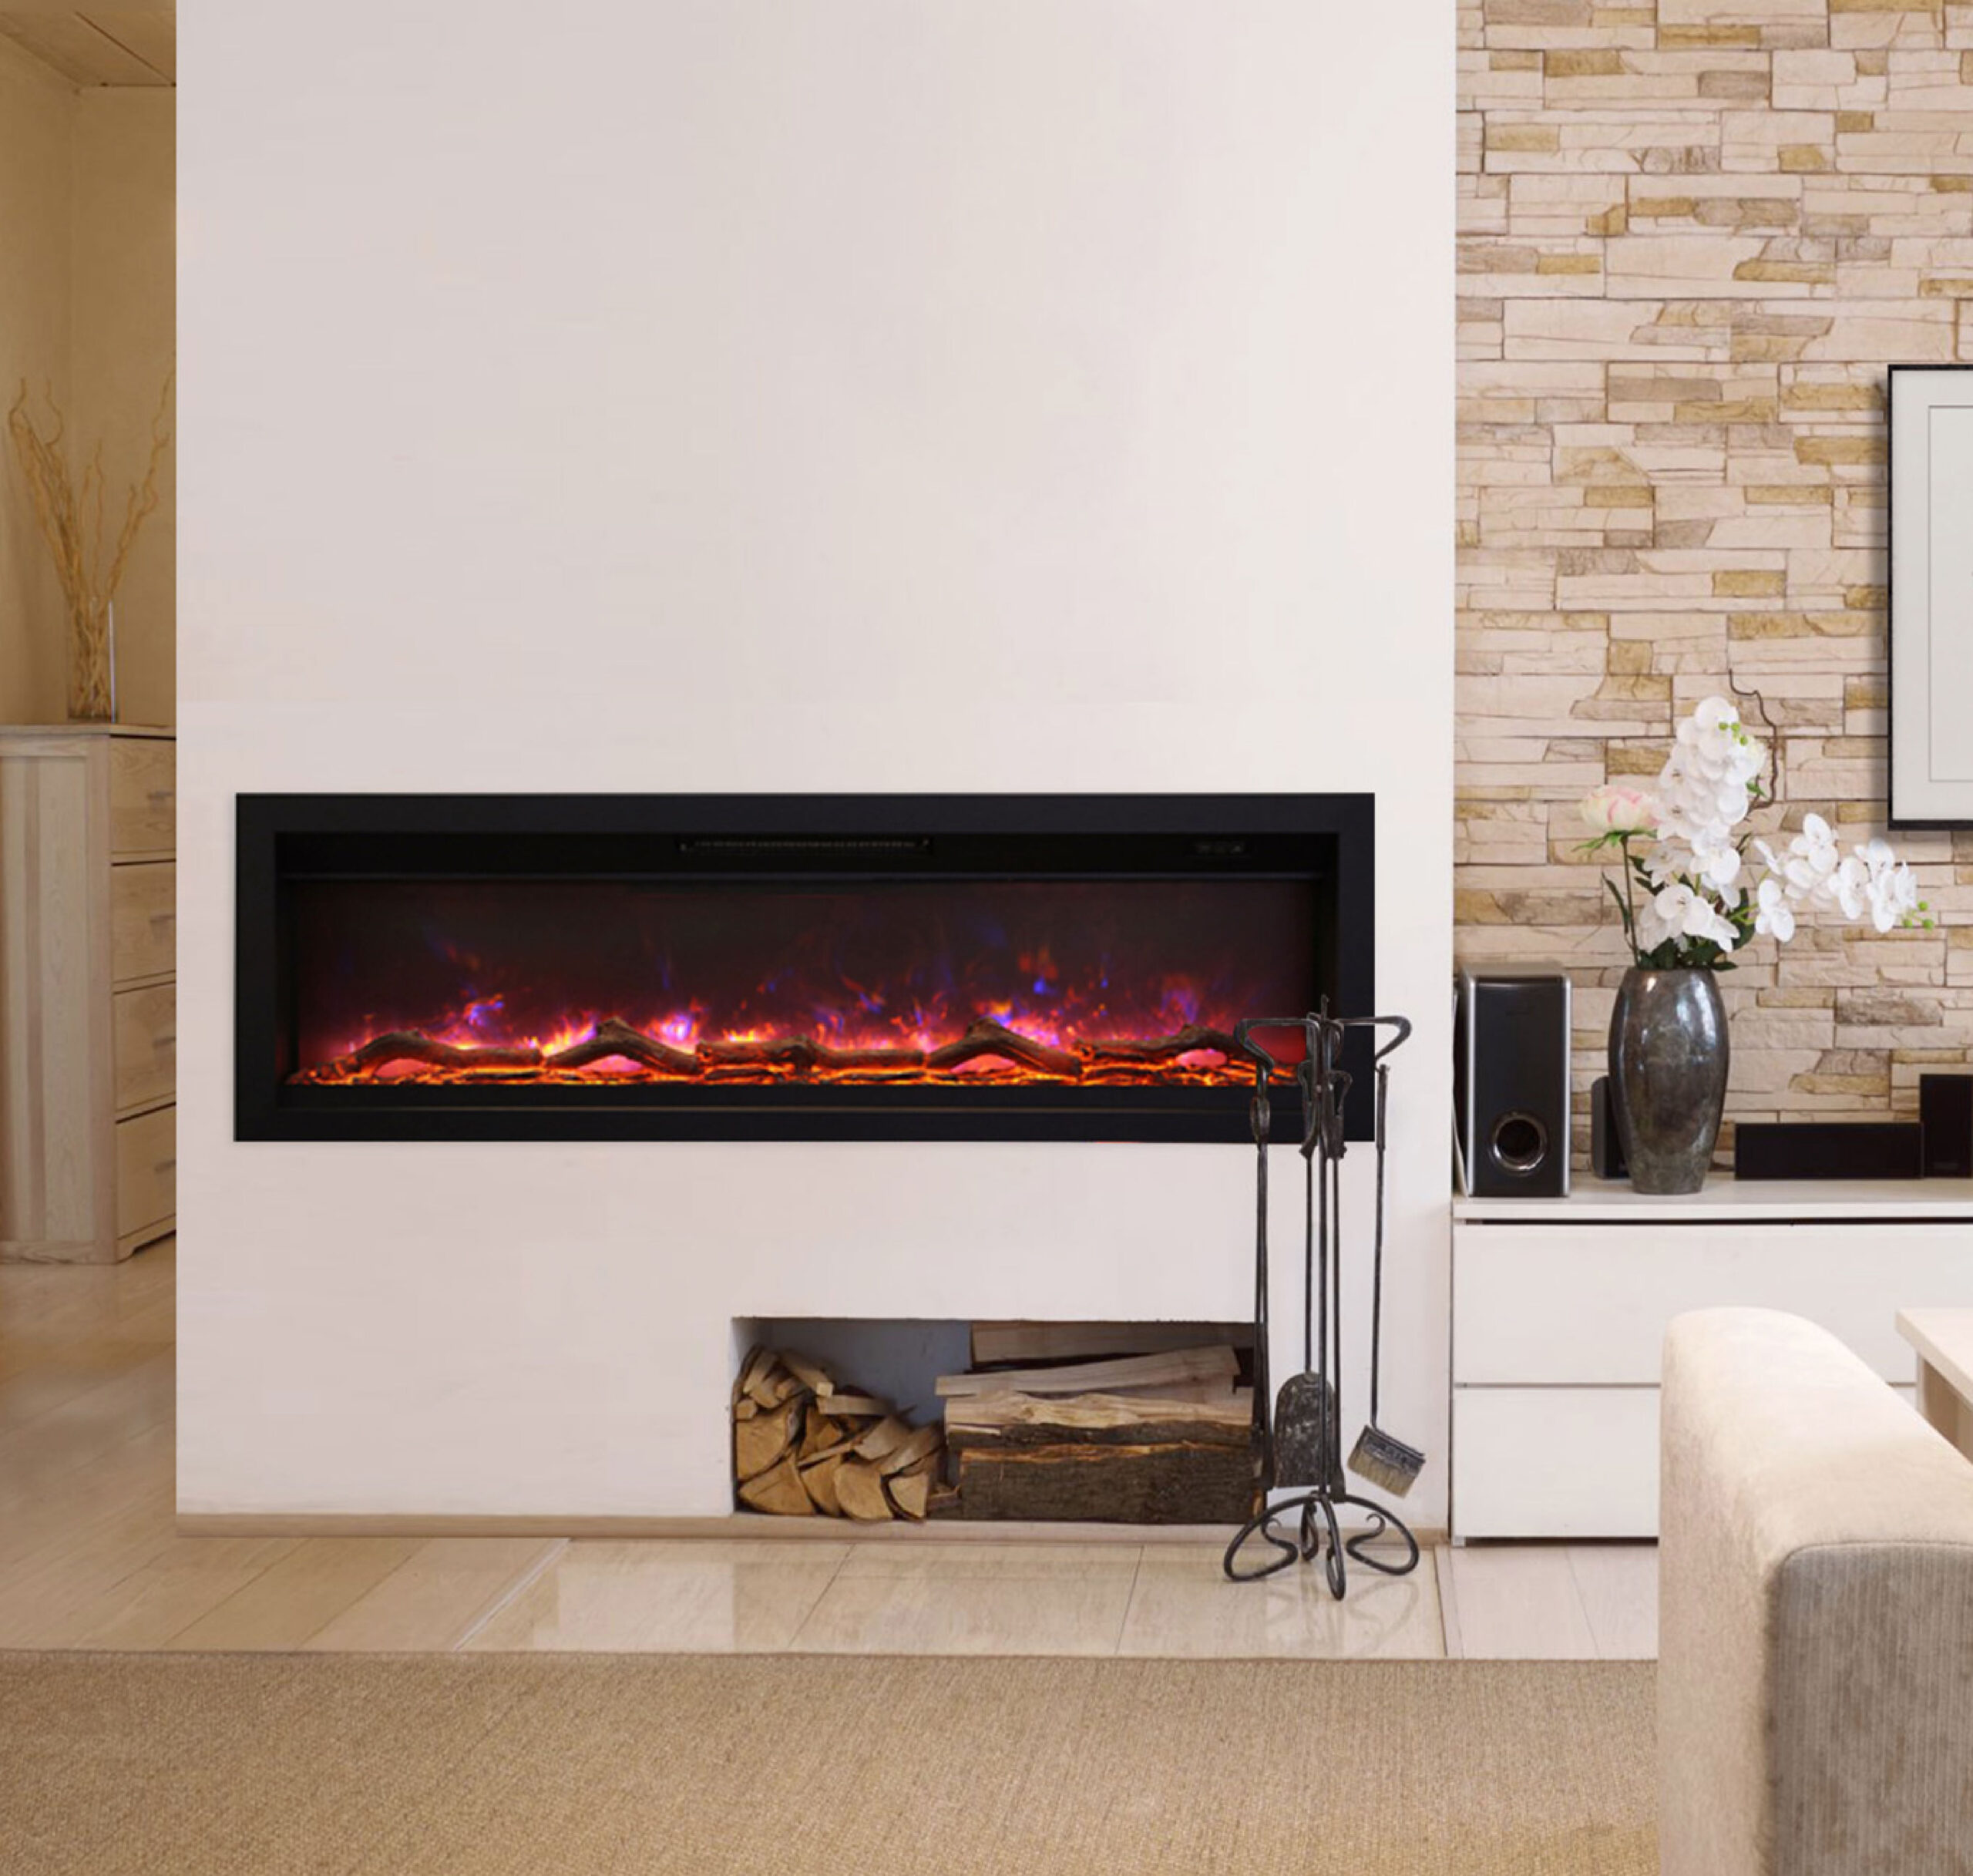 replace and restore with an electric fireplace from ambiance